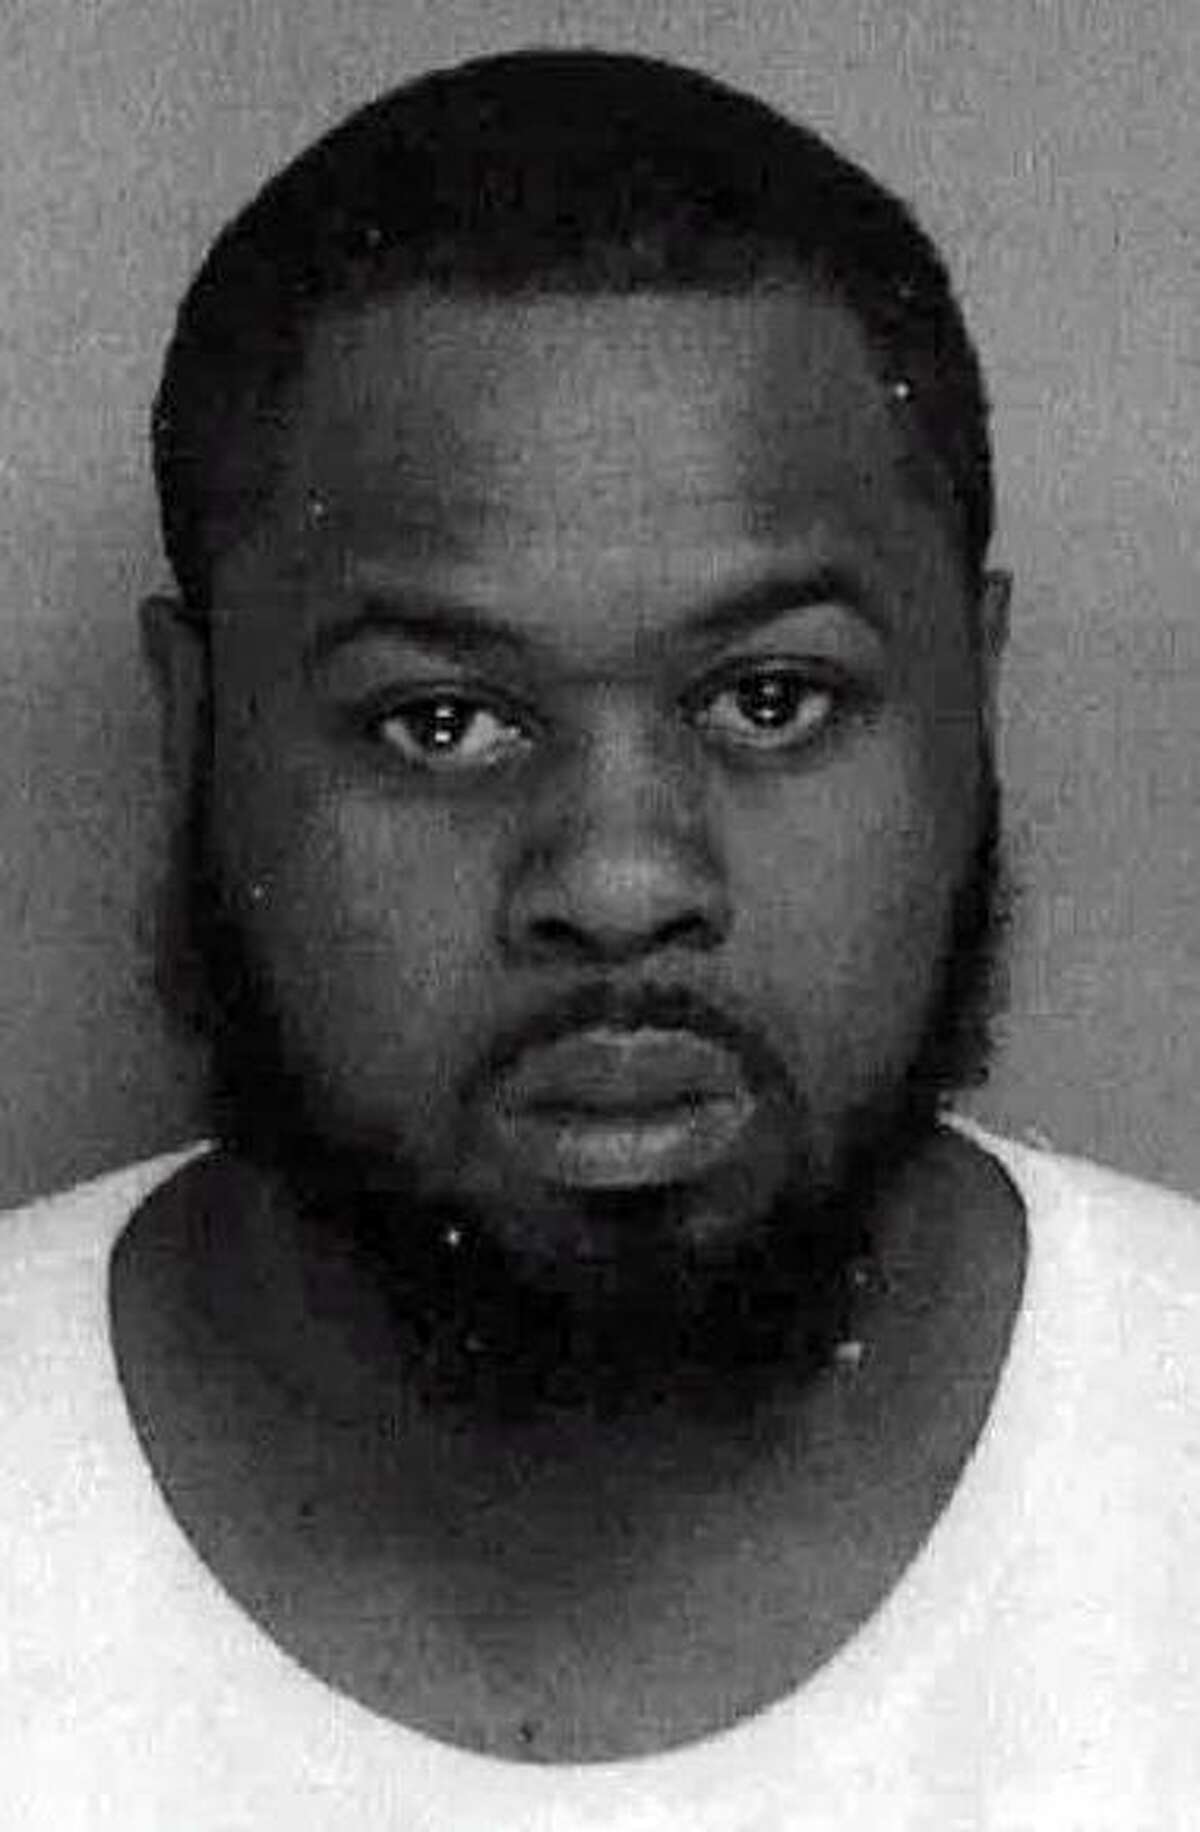 Linell Moseley, 33, of Reservoir Avenue in Bridgeport, Conn., was charged with first-degree reckless endangerment, second-degree burglary, interfering with an officer and possession of marijuana with intent to sell. He also faces charges of improper passing, failure to obey an officers signal, engaging police in a pursuit, evading responsibility and reckless operation.